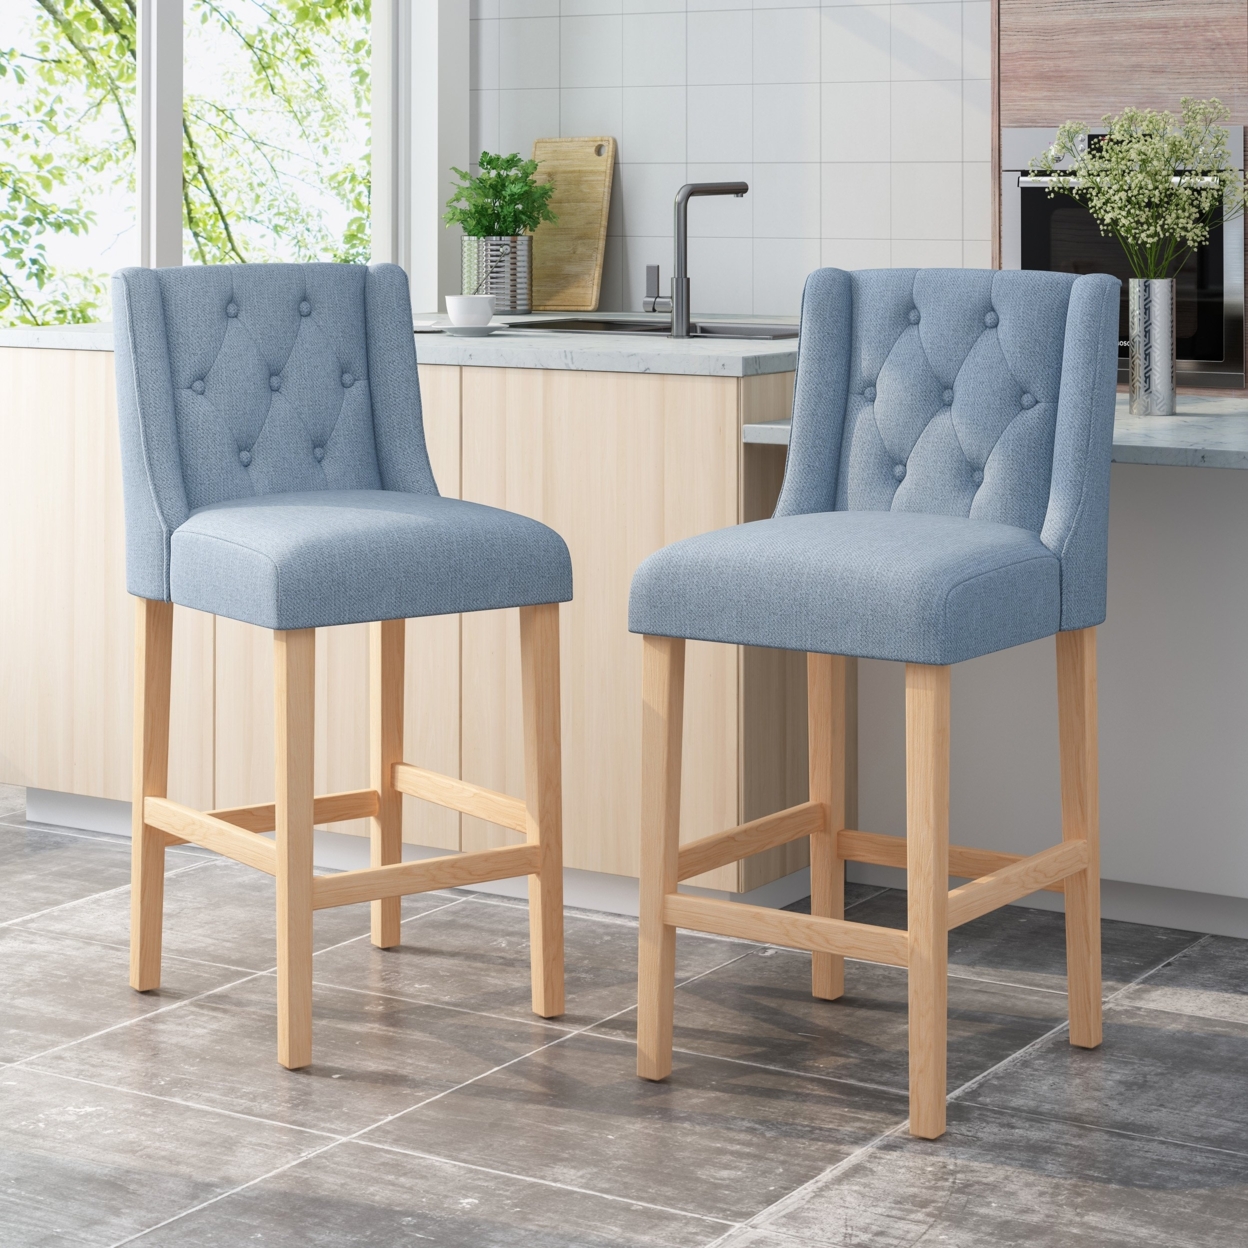 Zaydrian Button Tufted Fabric Wingback Bar Stool (Set Of 2) - Light Blue